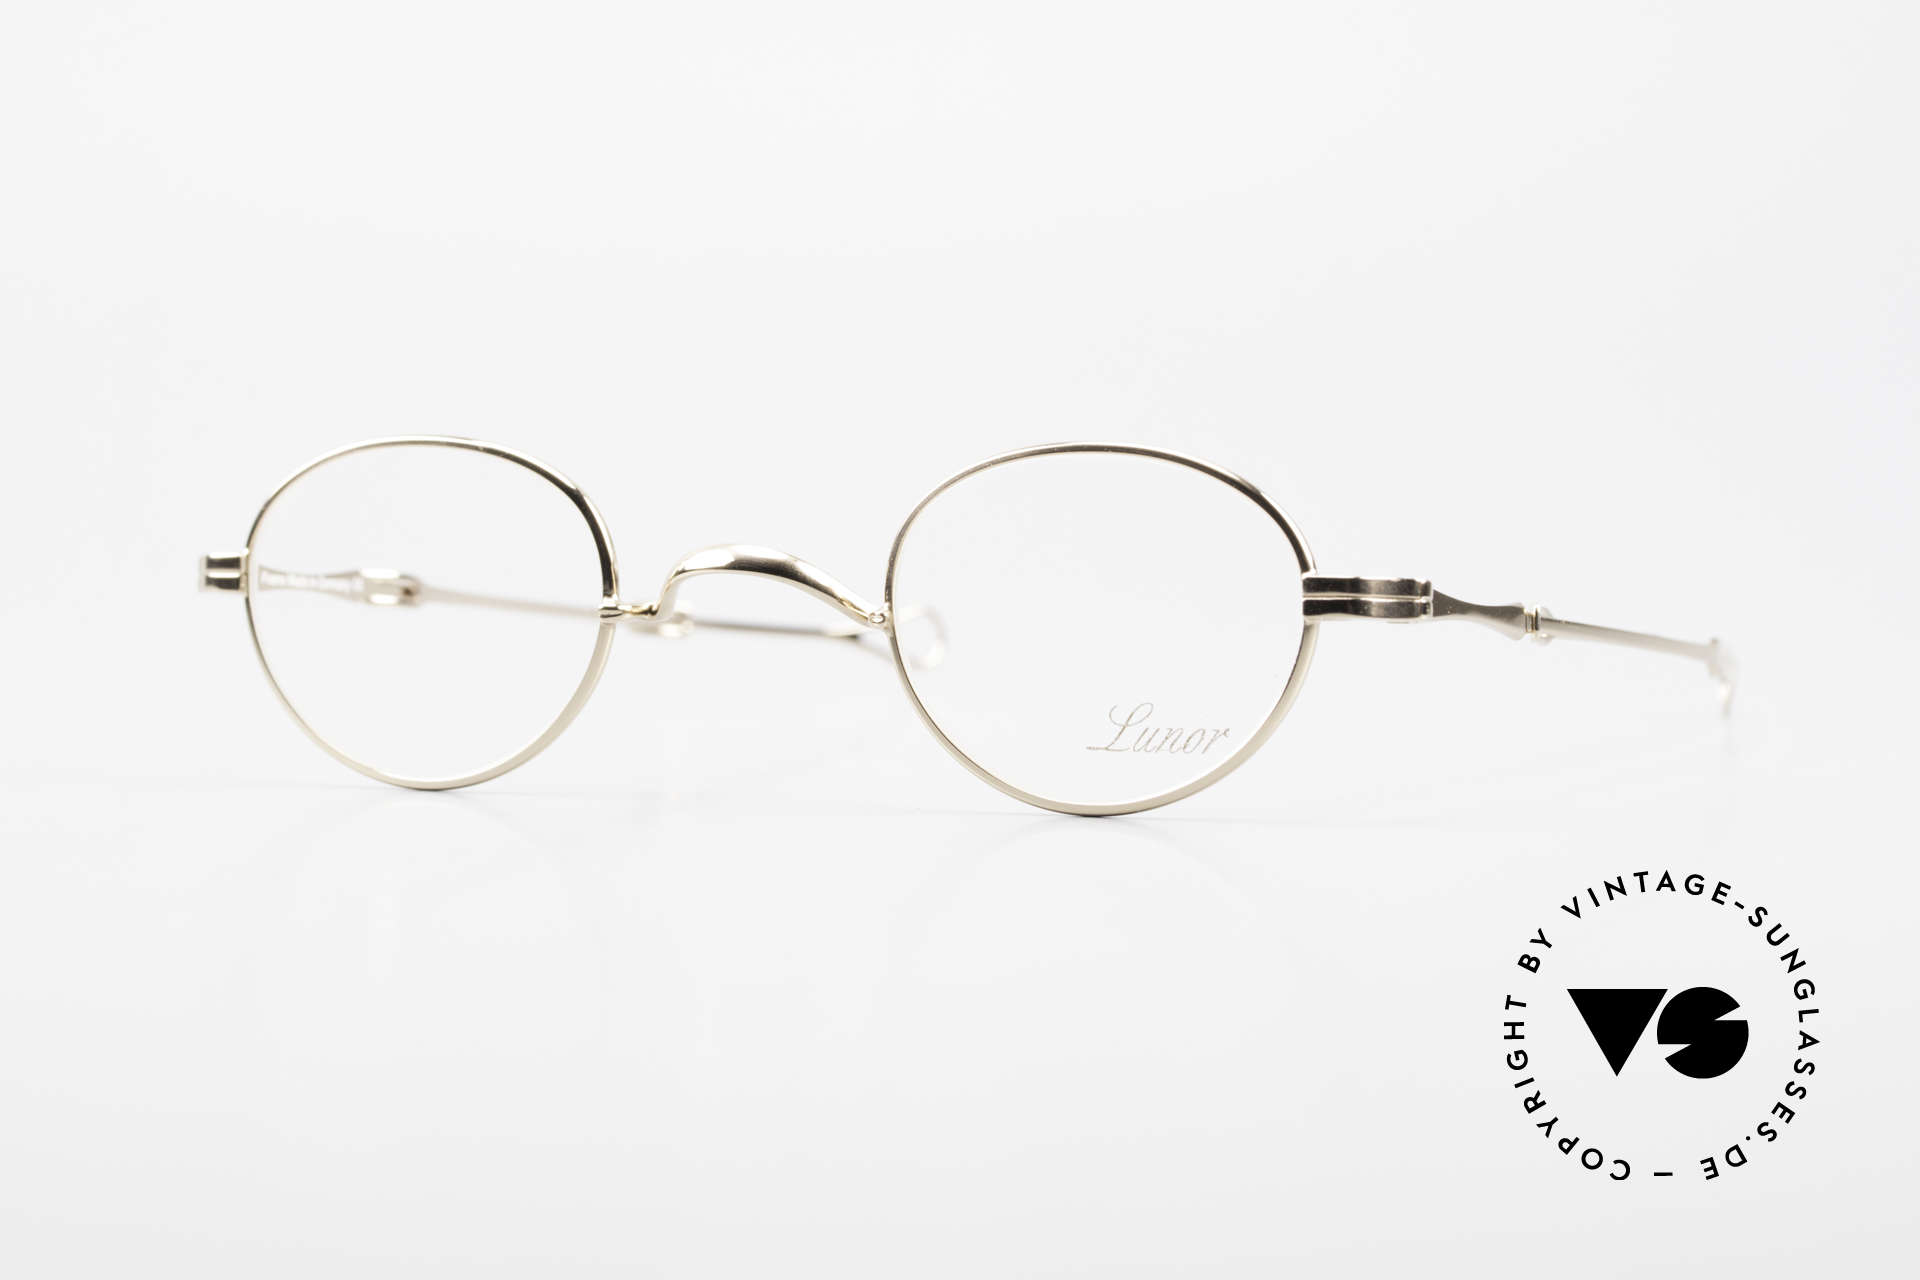 Lunor I 03 Telescopic Gold Plated With Slide Temples, Lunor: shortcut for French "Lunette d'Or" (gold glasses), Made for Men and Women